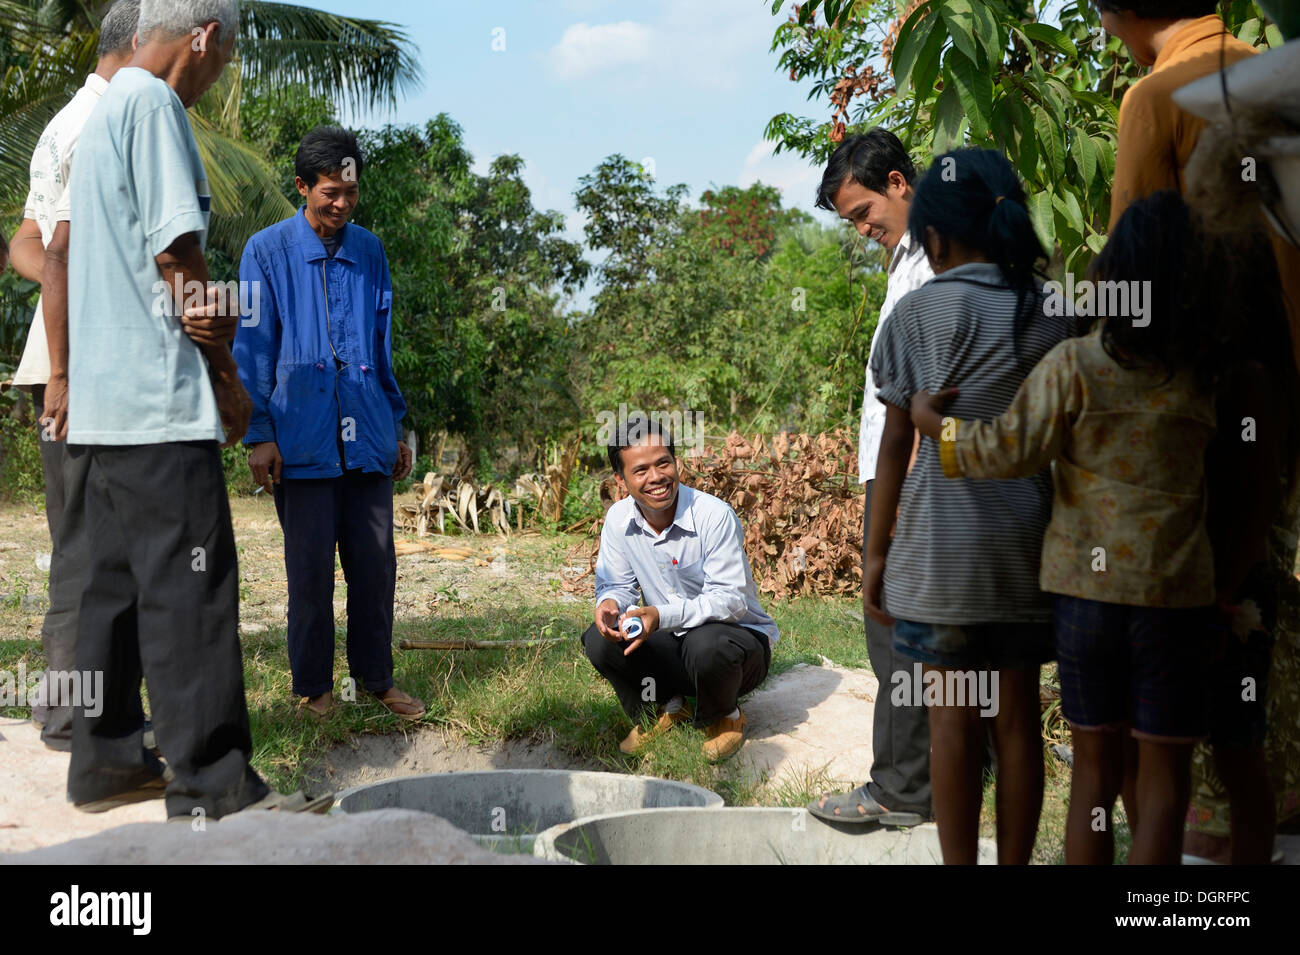 Cambodia, Takeo Province, Members of aid organisation discussing improvements of water supply with villagers Stock Photo